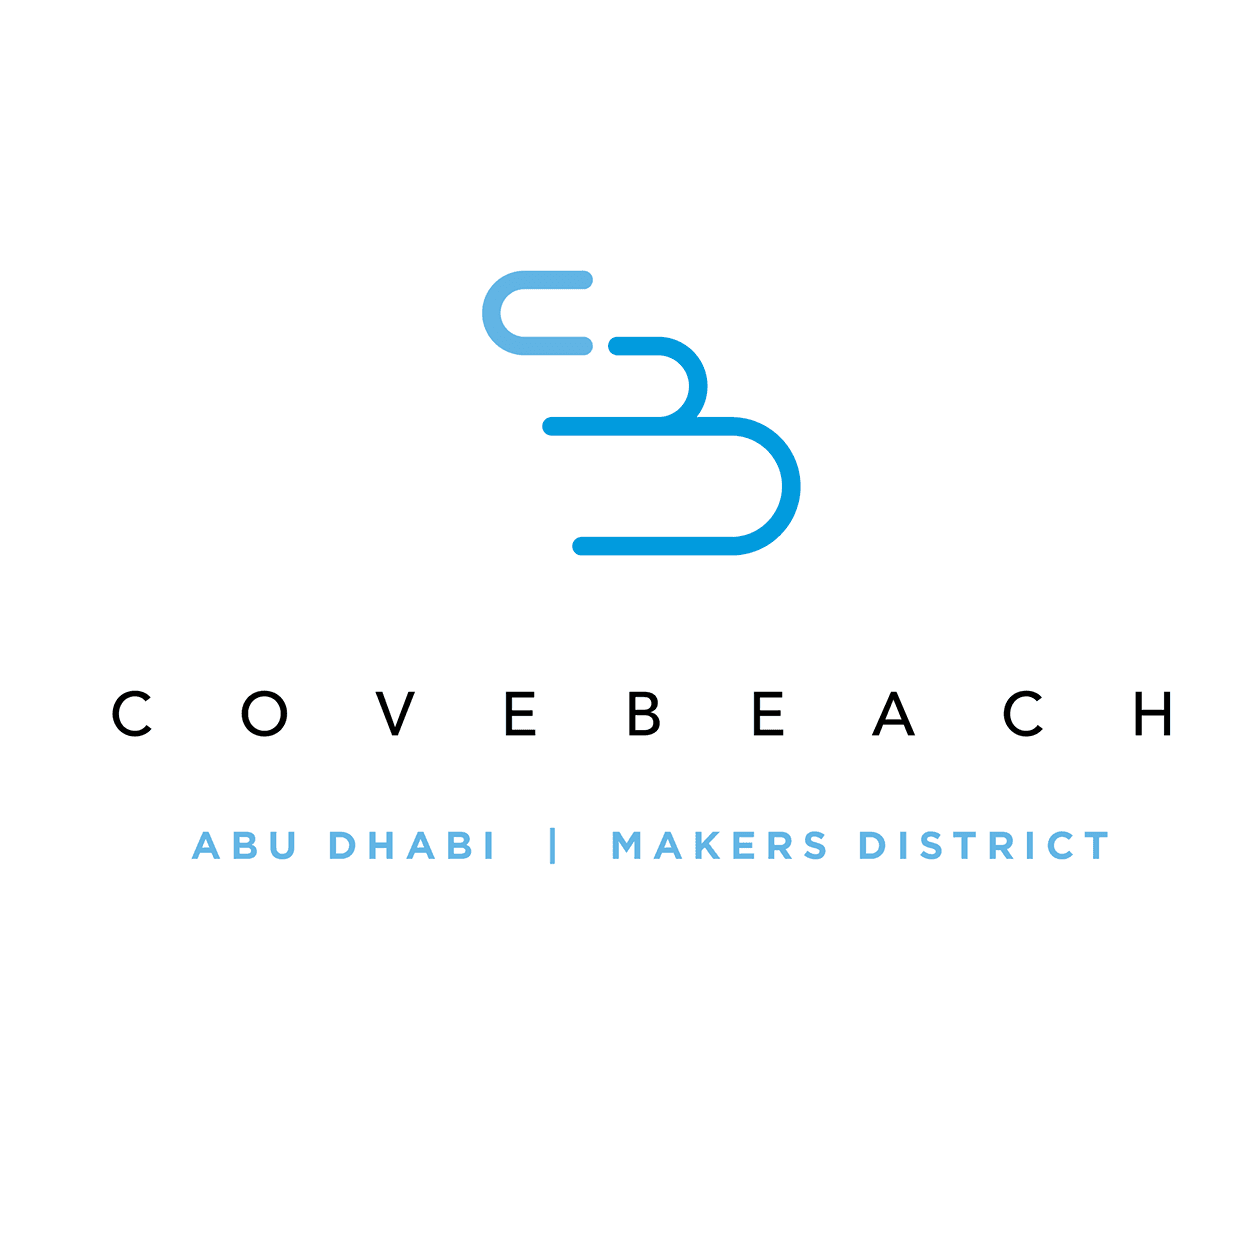 Cove Beach Makers District